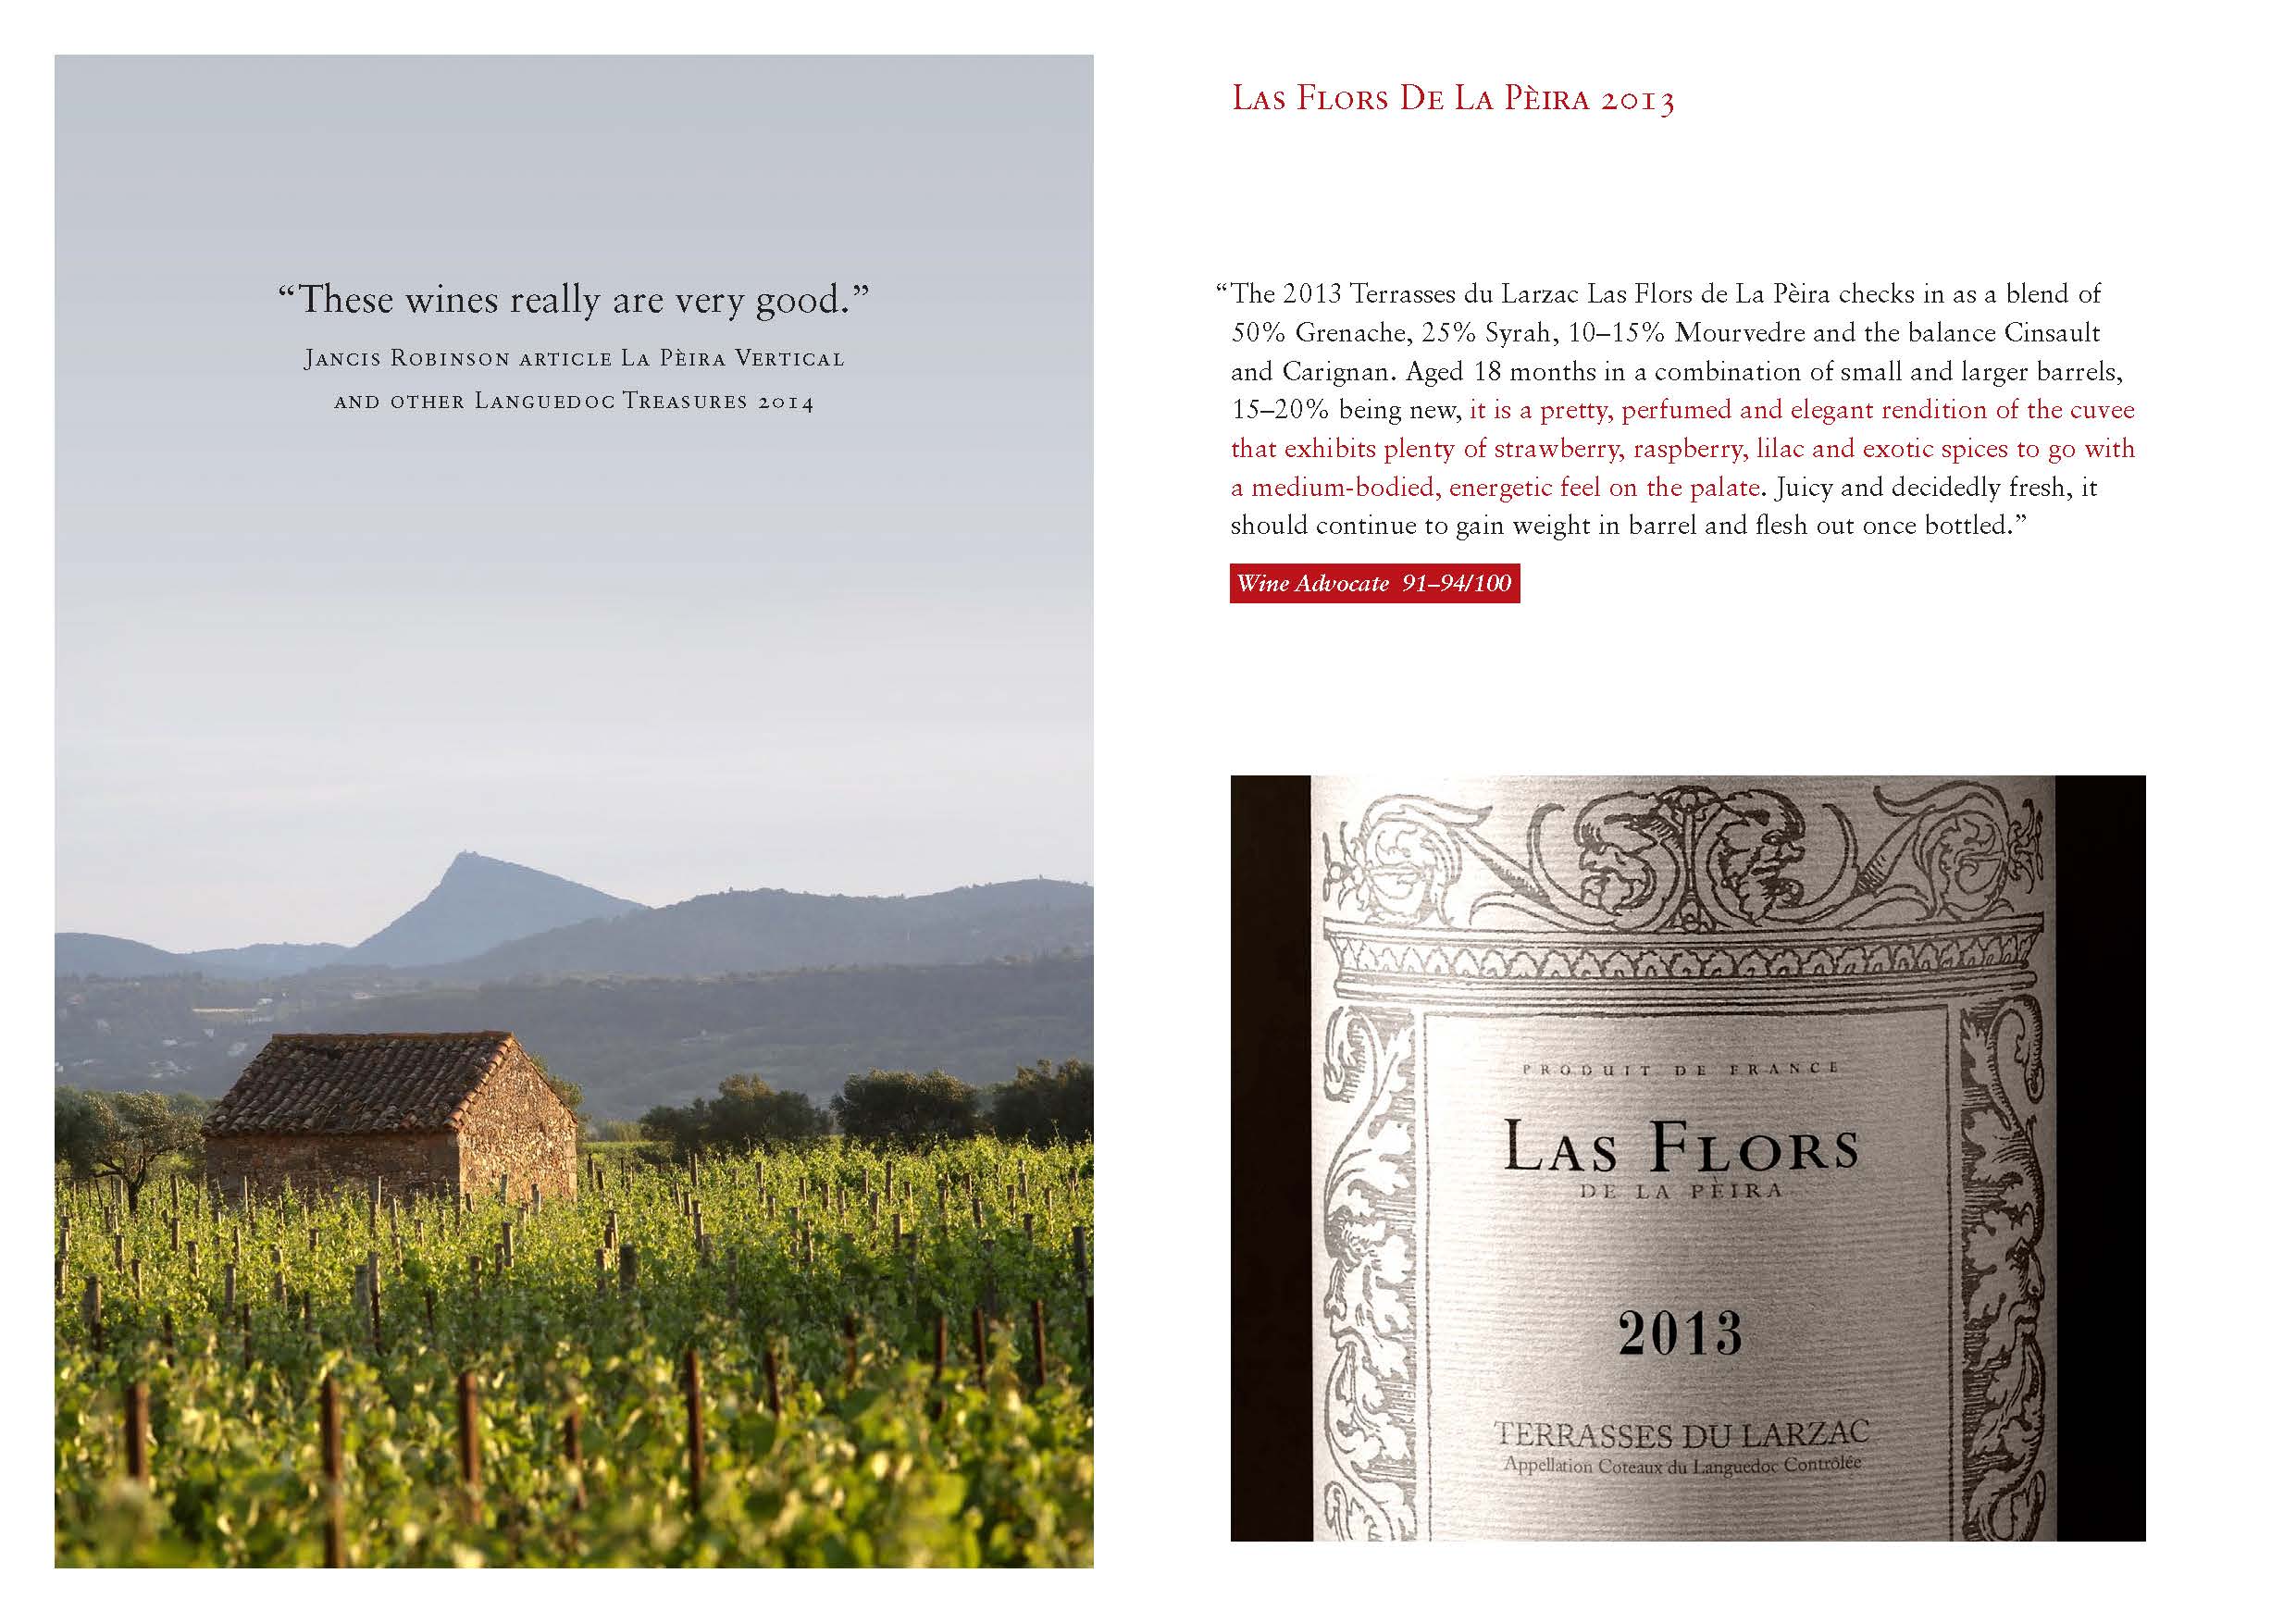 La Peira 2013 Vintage: “In contrast to elsewhere in France, 2013 was a superb vintage in Languedoc-Roussillon” La Peira